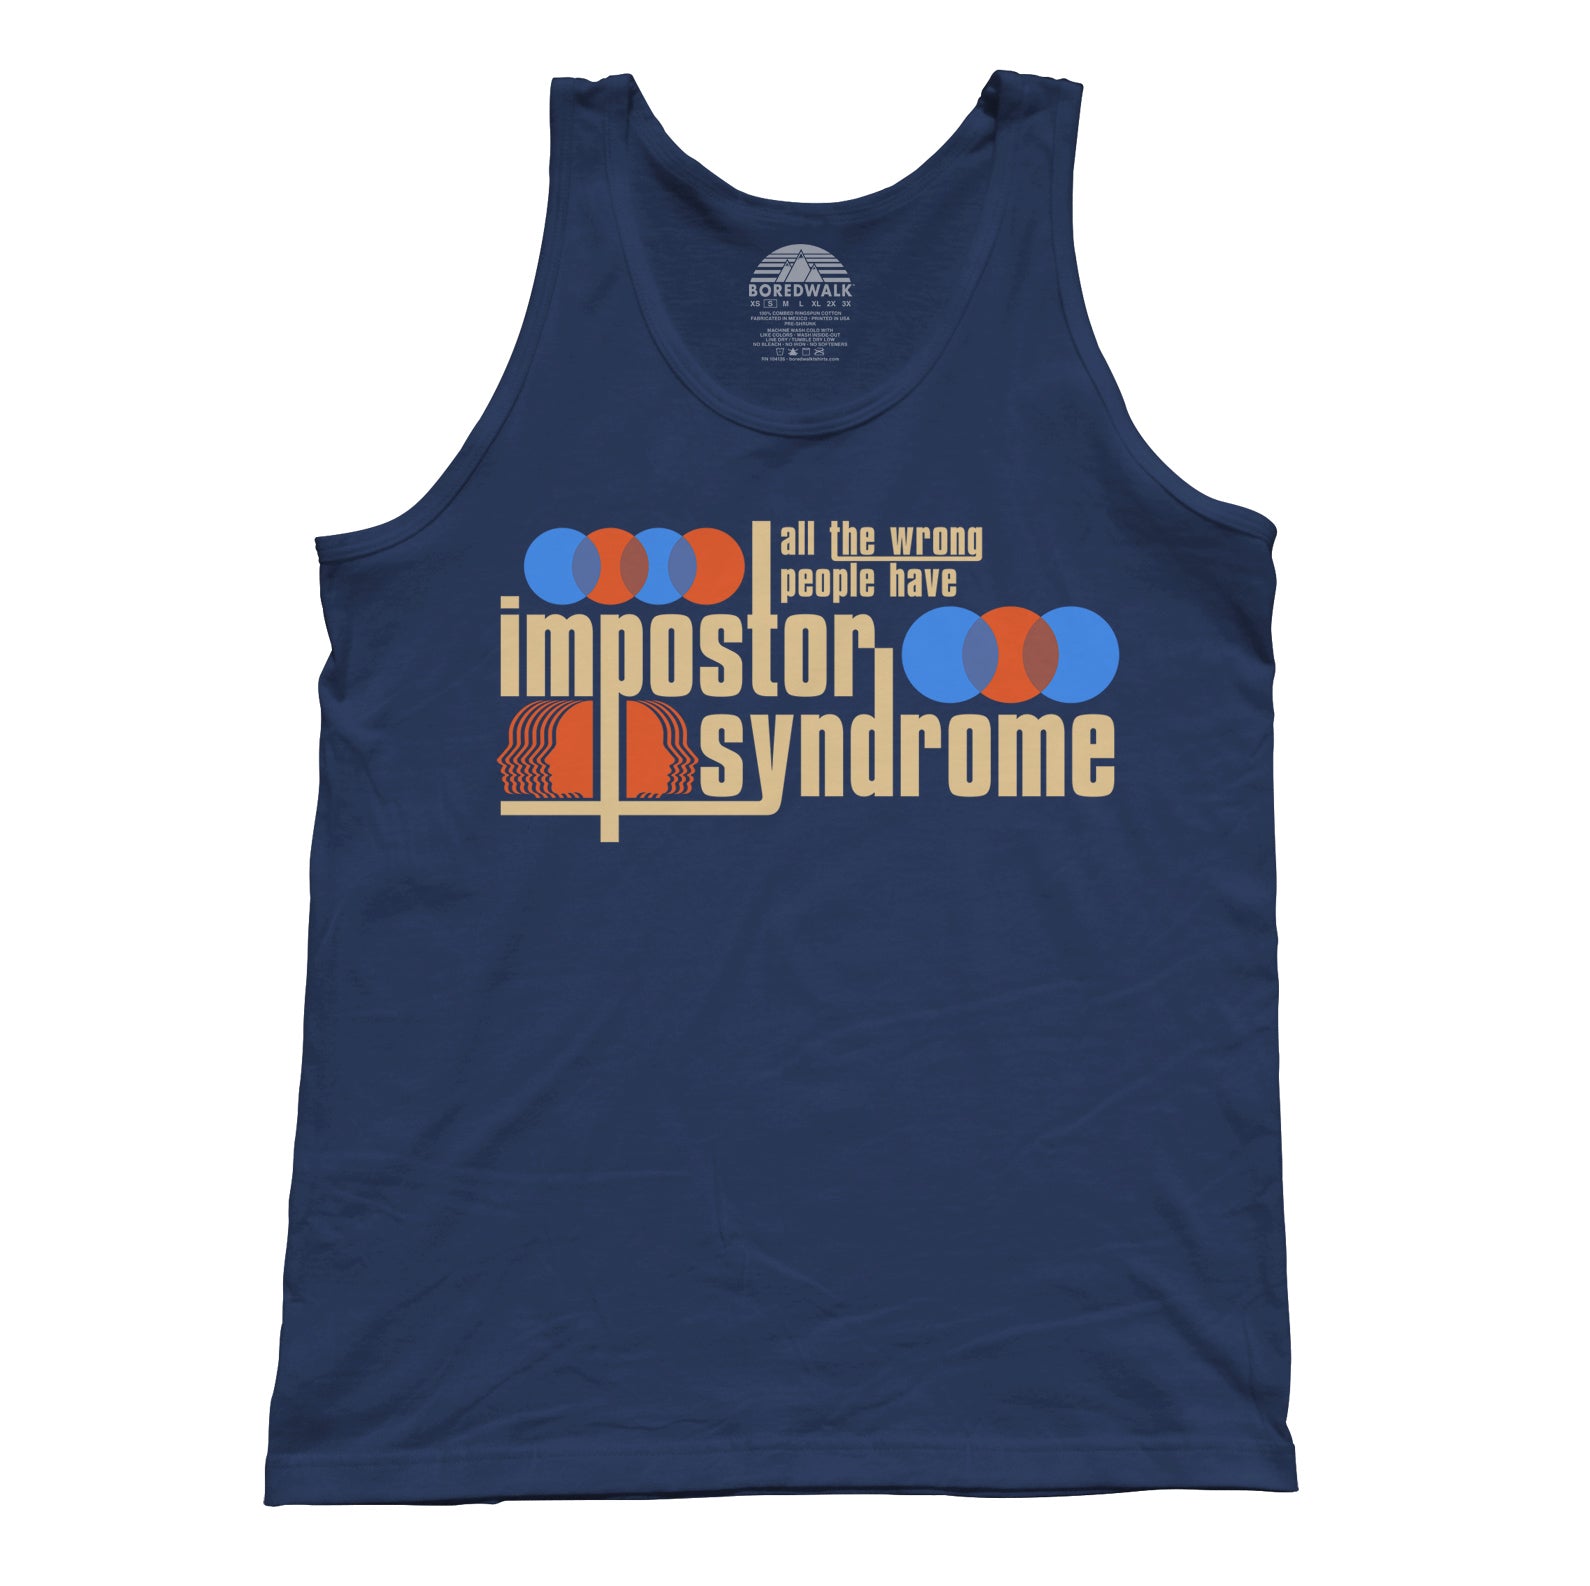 Unisex All The Wrong People Have Impostor Syndrome Tank Top